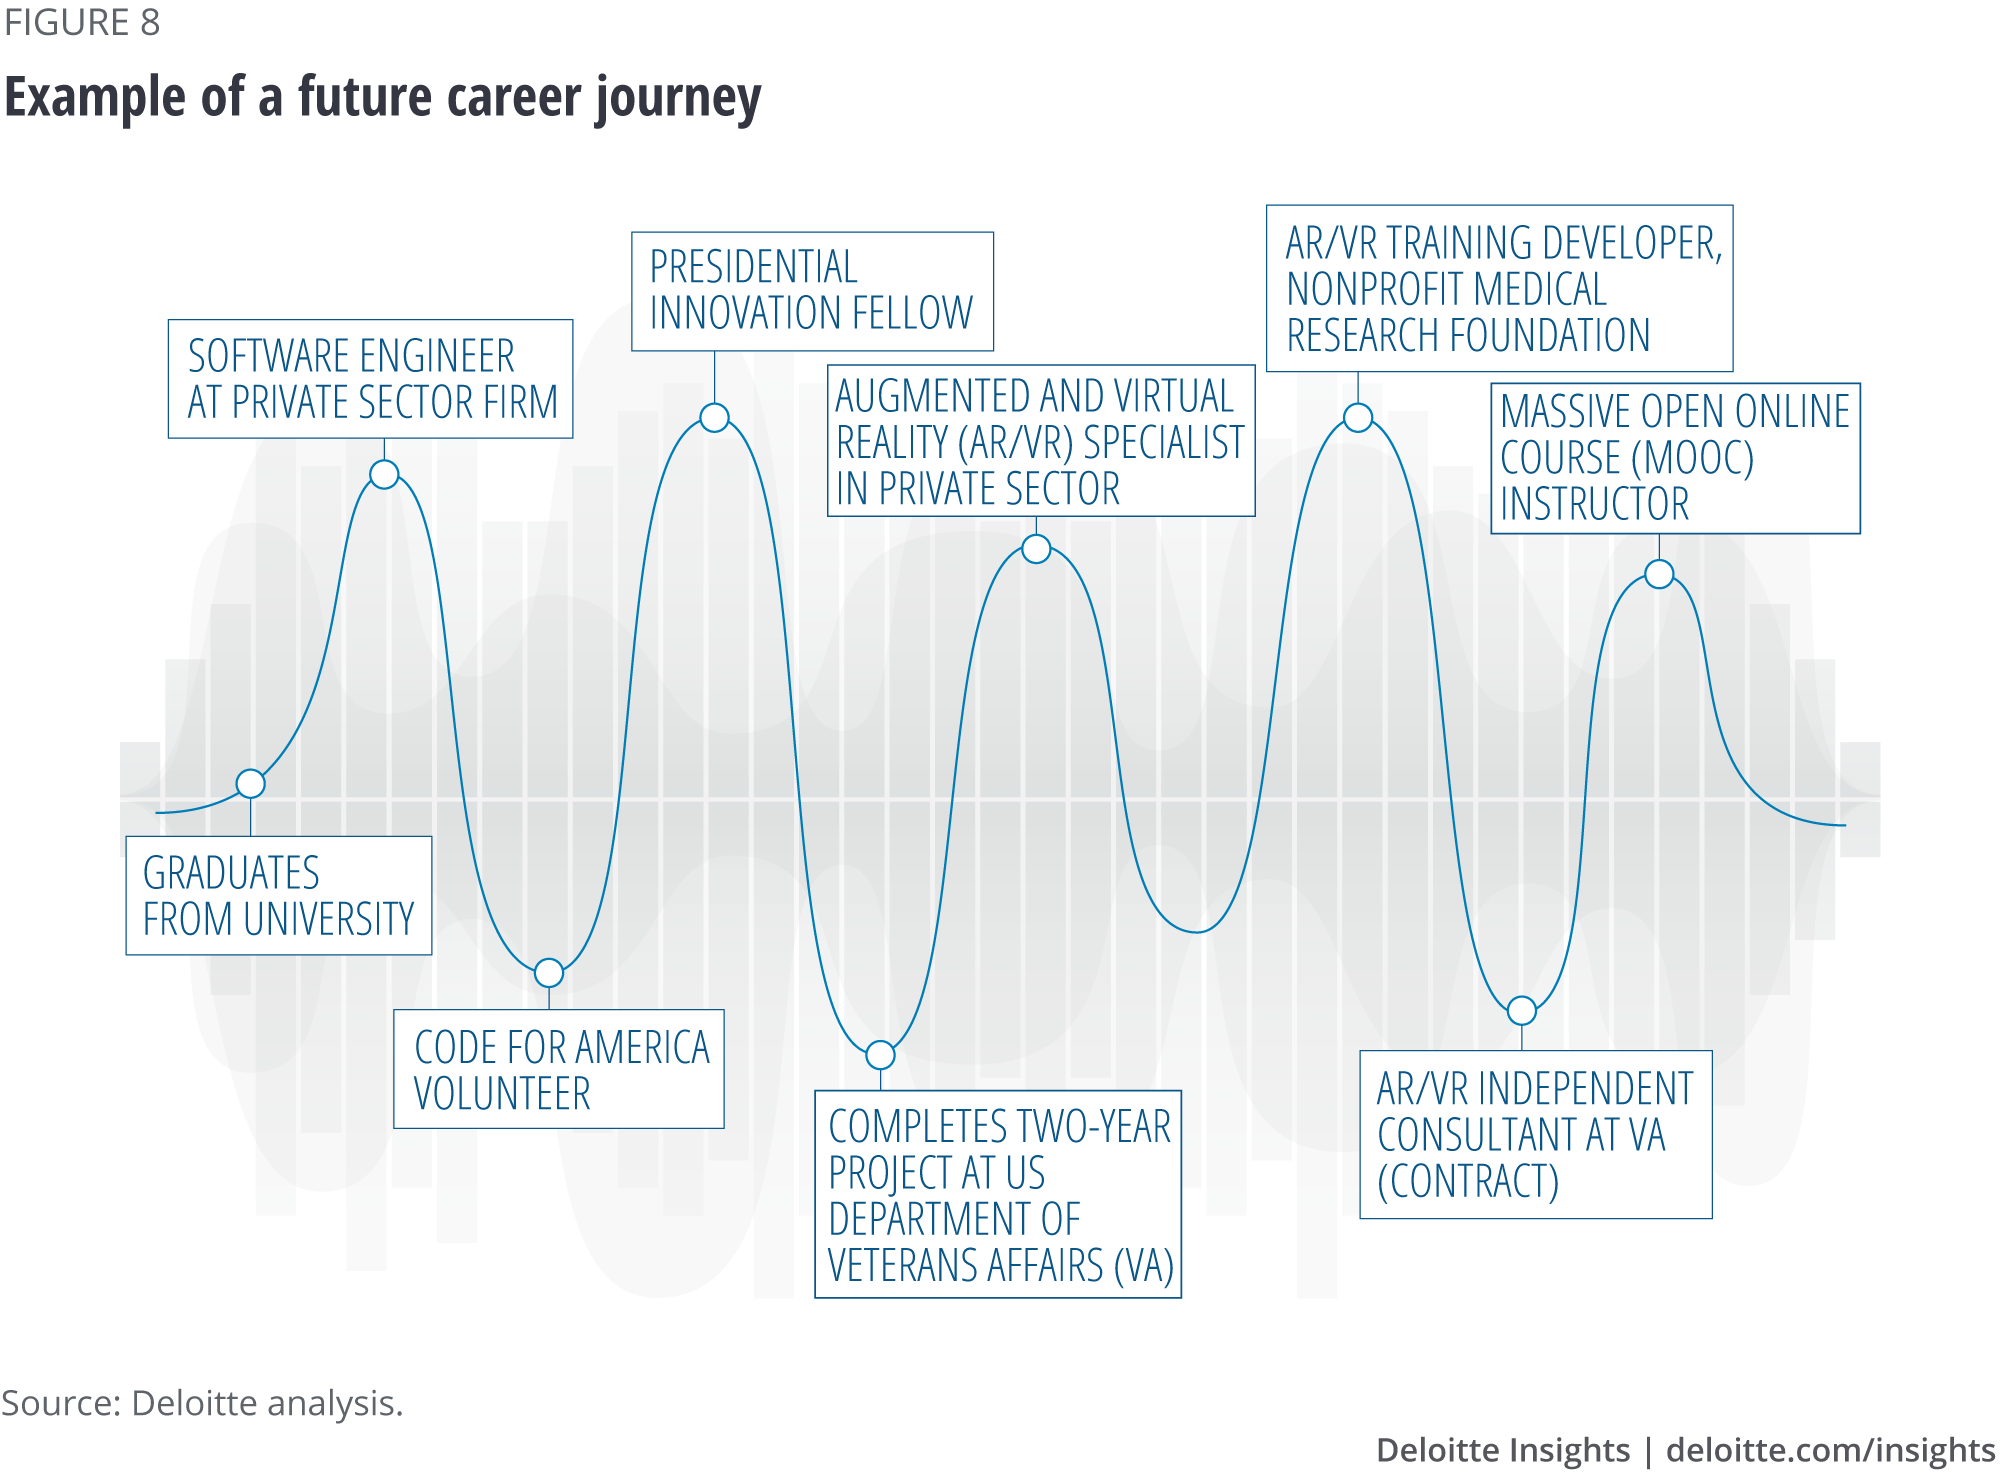 Example of a future career journey